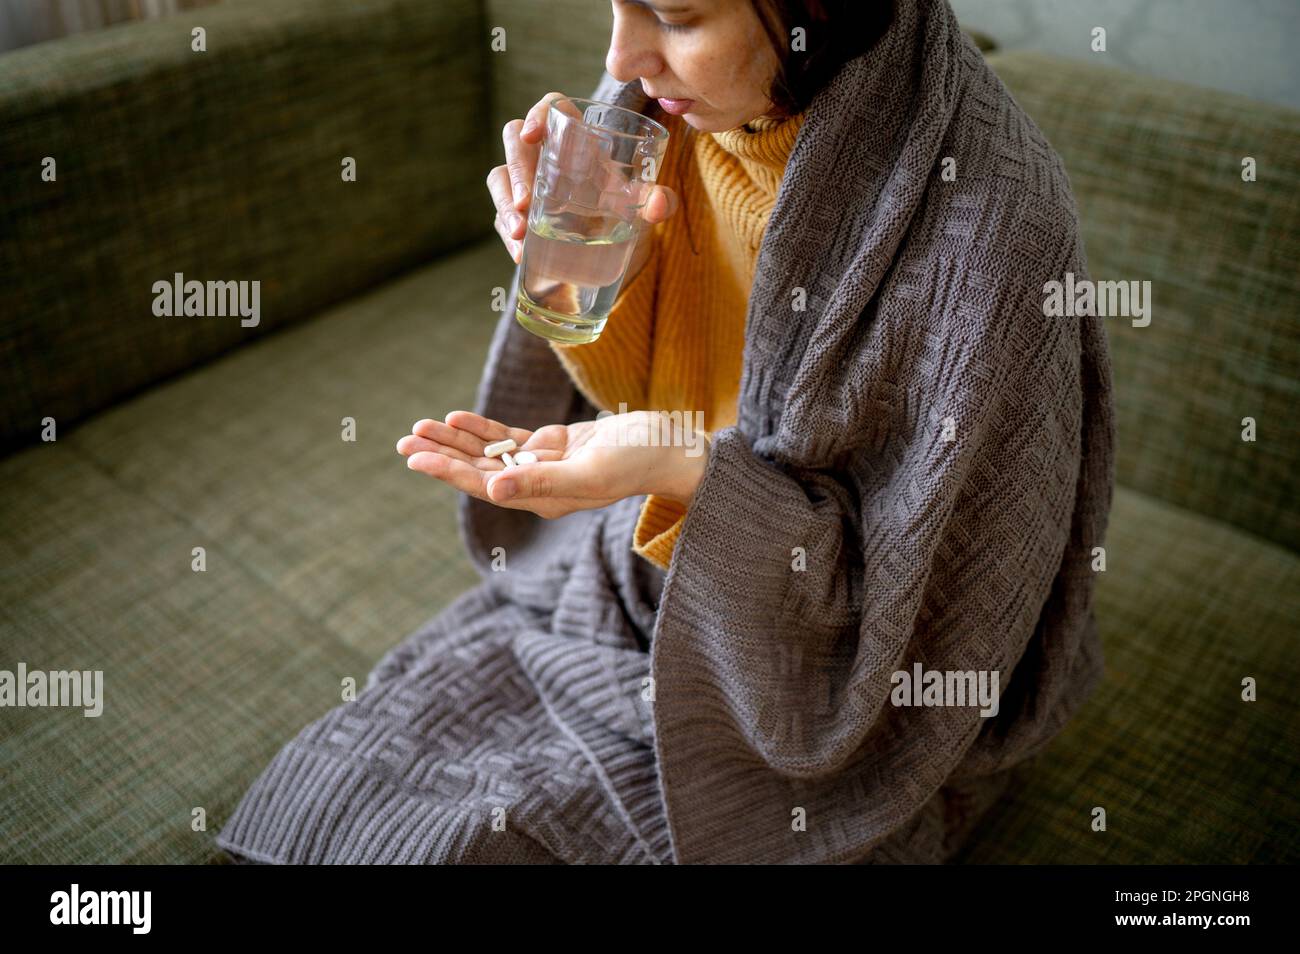 Sick woman wrapped in blanket taking medicine at home Stock Photo